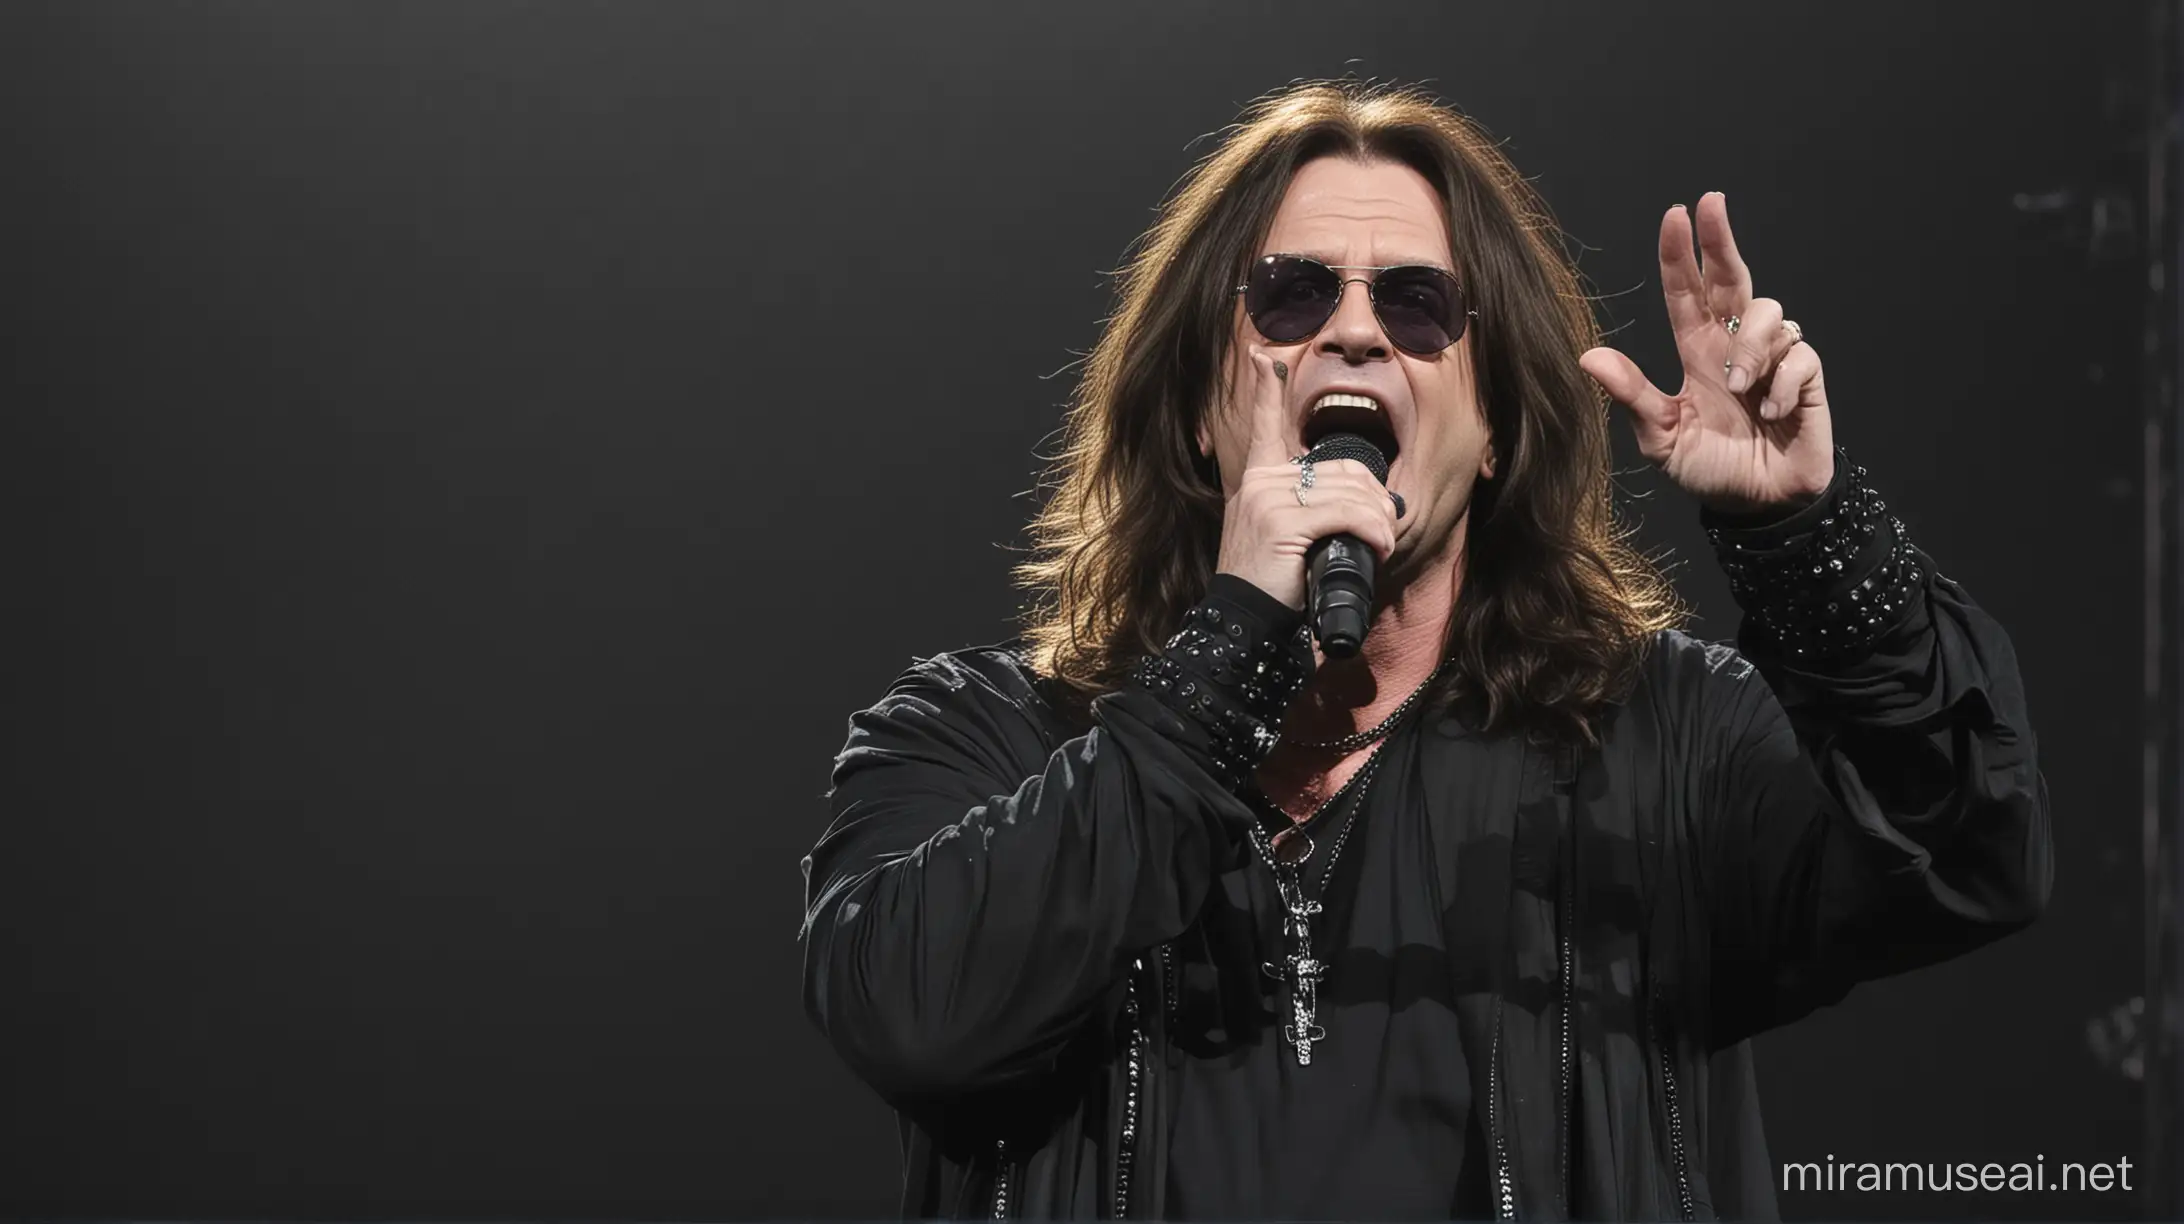 Ozzy Osbourne Performing Live on Stage Iconic Rock Legend Energizing Concert Crowd